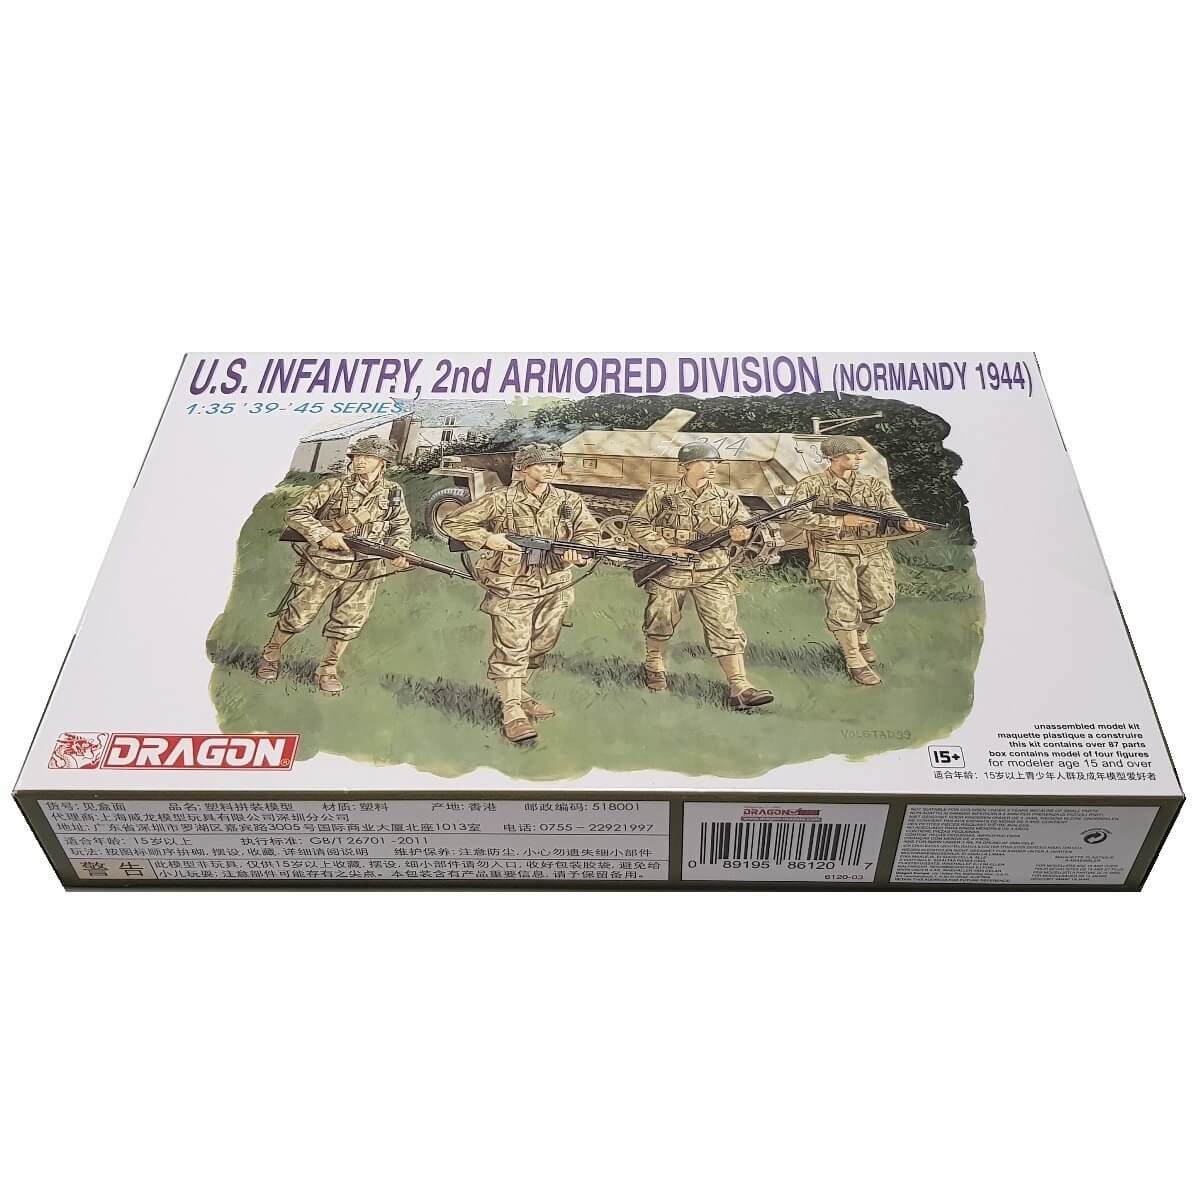 1:35 US Infantry 2nd Armored Division - Normandy 1944 - DRAGON